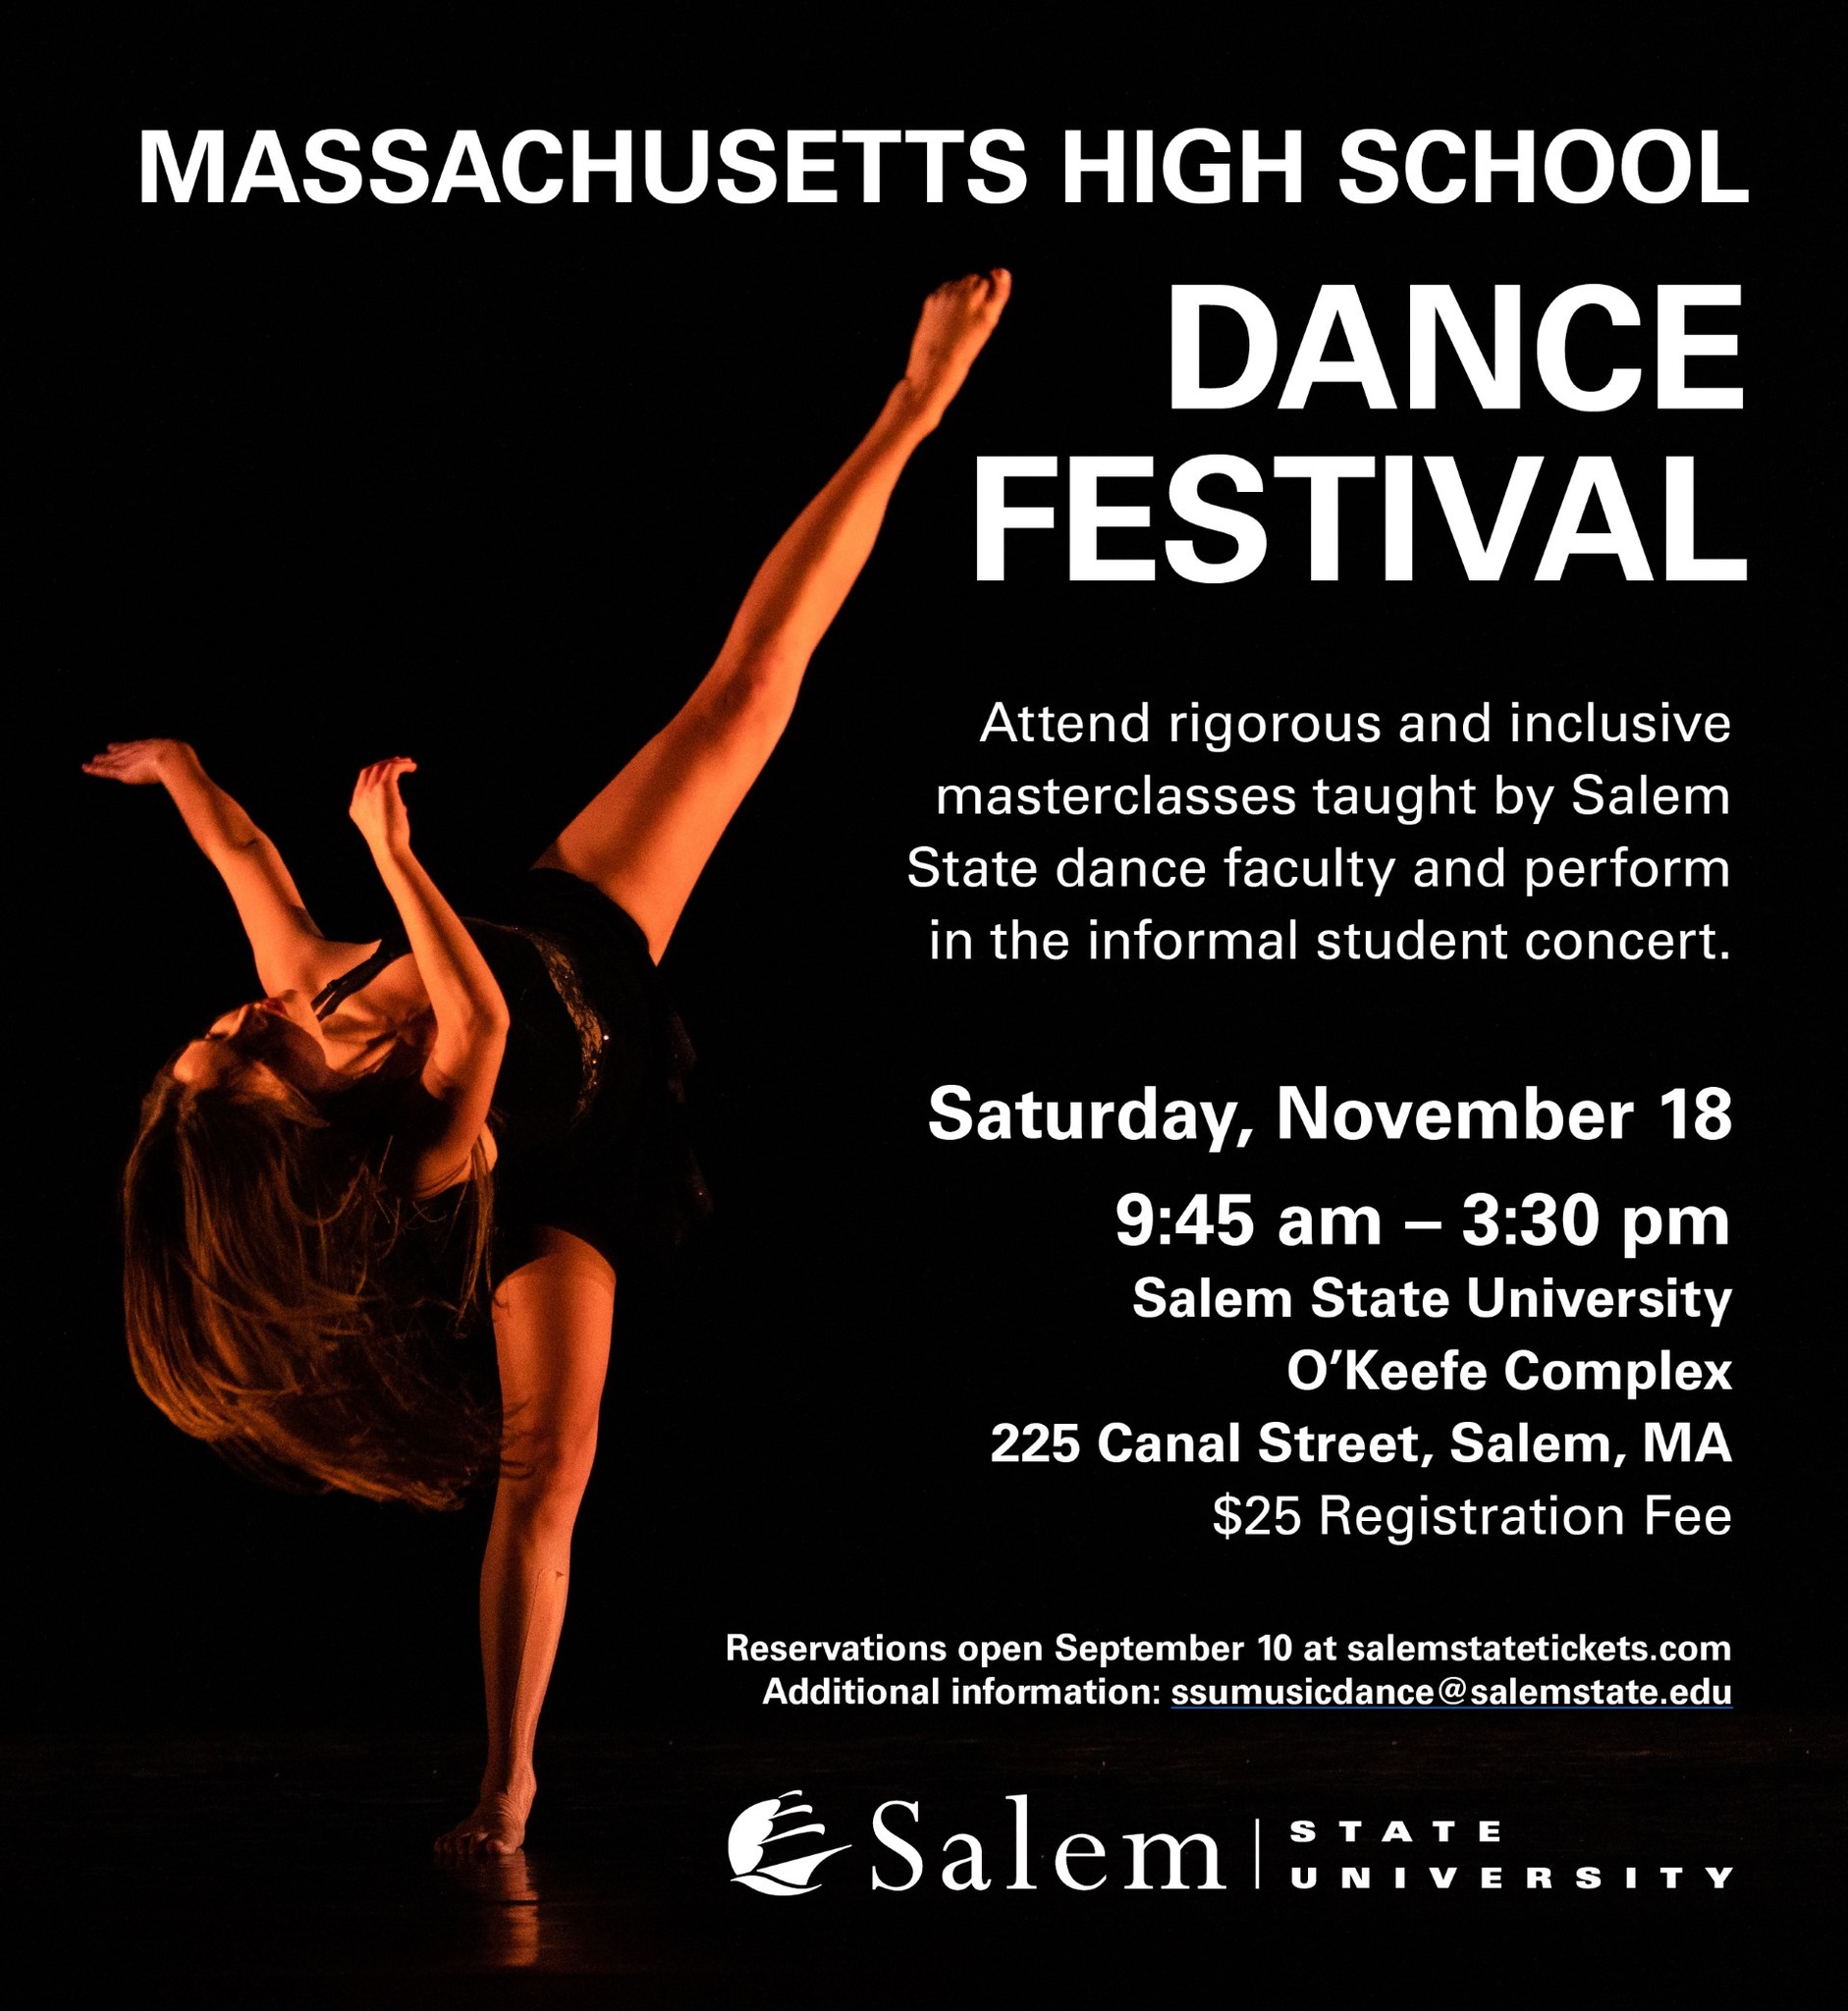 MA High School Dance Fest poster with event information on the right displayed over a photo of a dancer tilting their body and lifting their leg towards vertical.